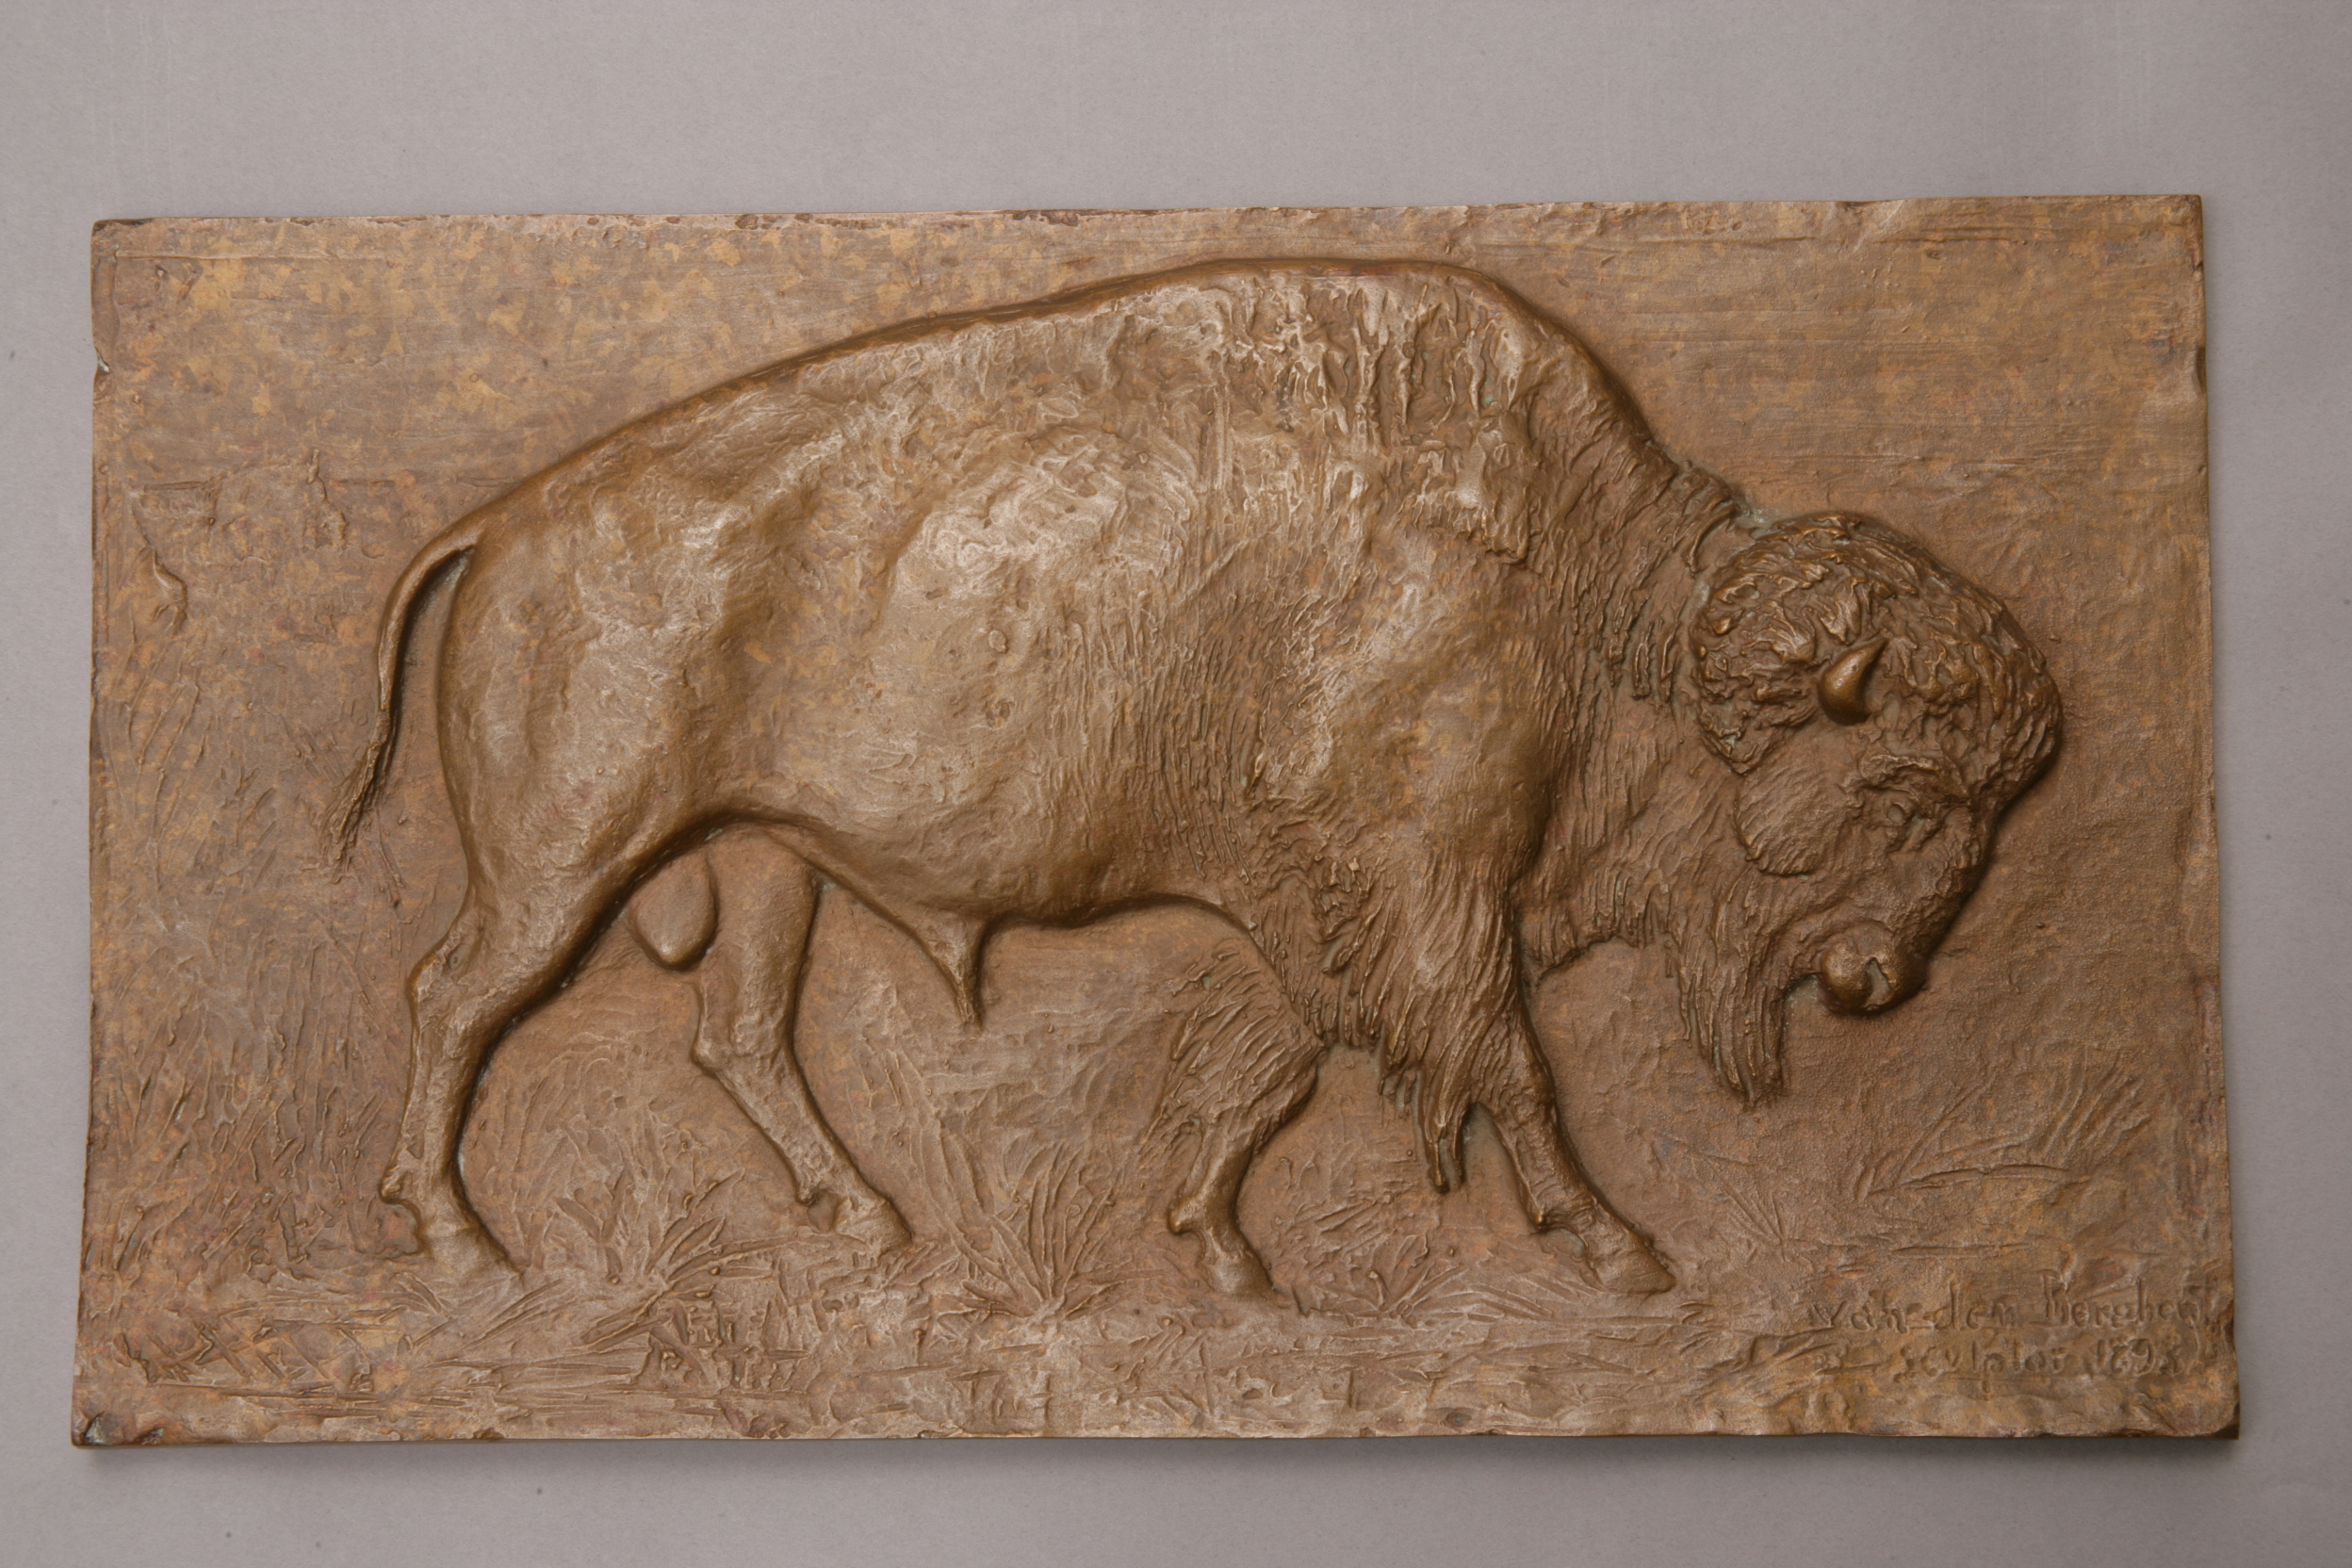 A rectangular plaque with a raised bas-relief carving of a bison standing with its head down. 